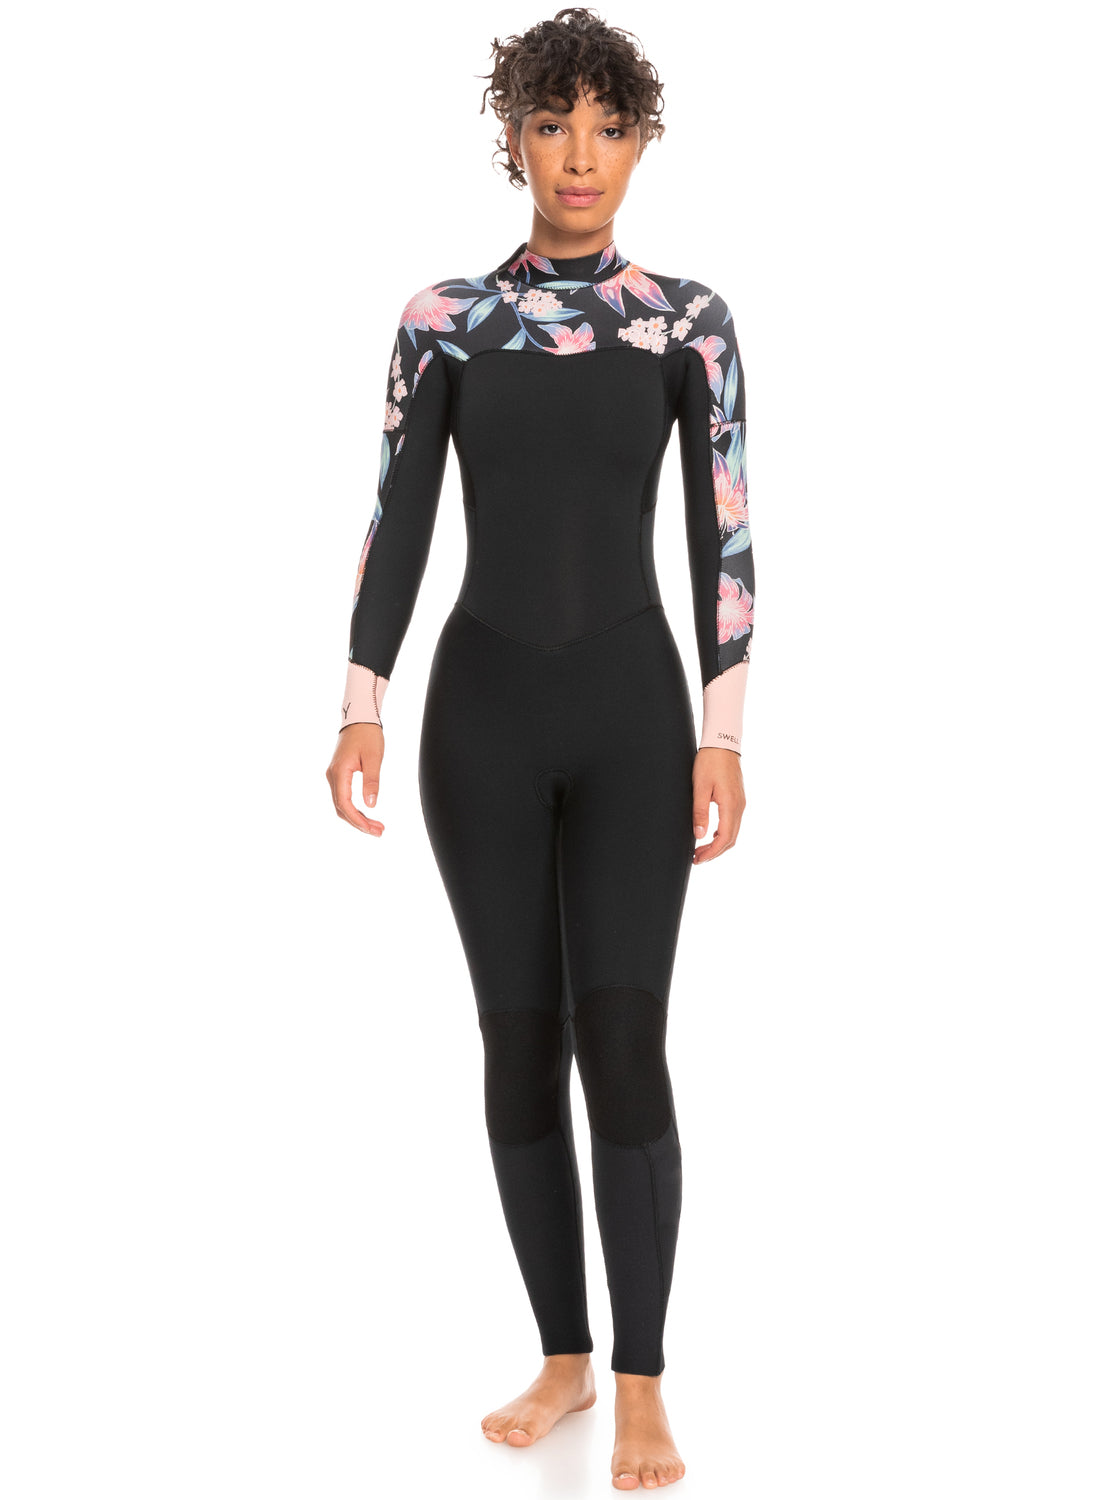 Roxy Women's 3/2mm Swell Series Wetsuit | Roxy | Portwest - The Outdoor Shop